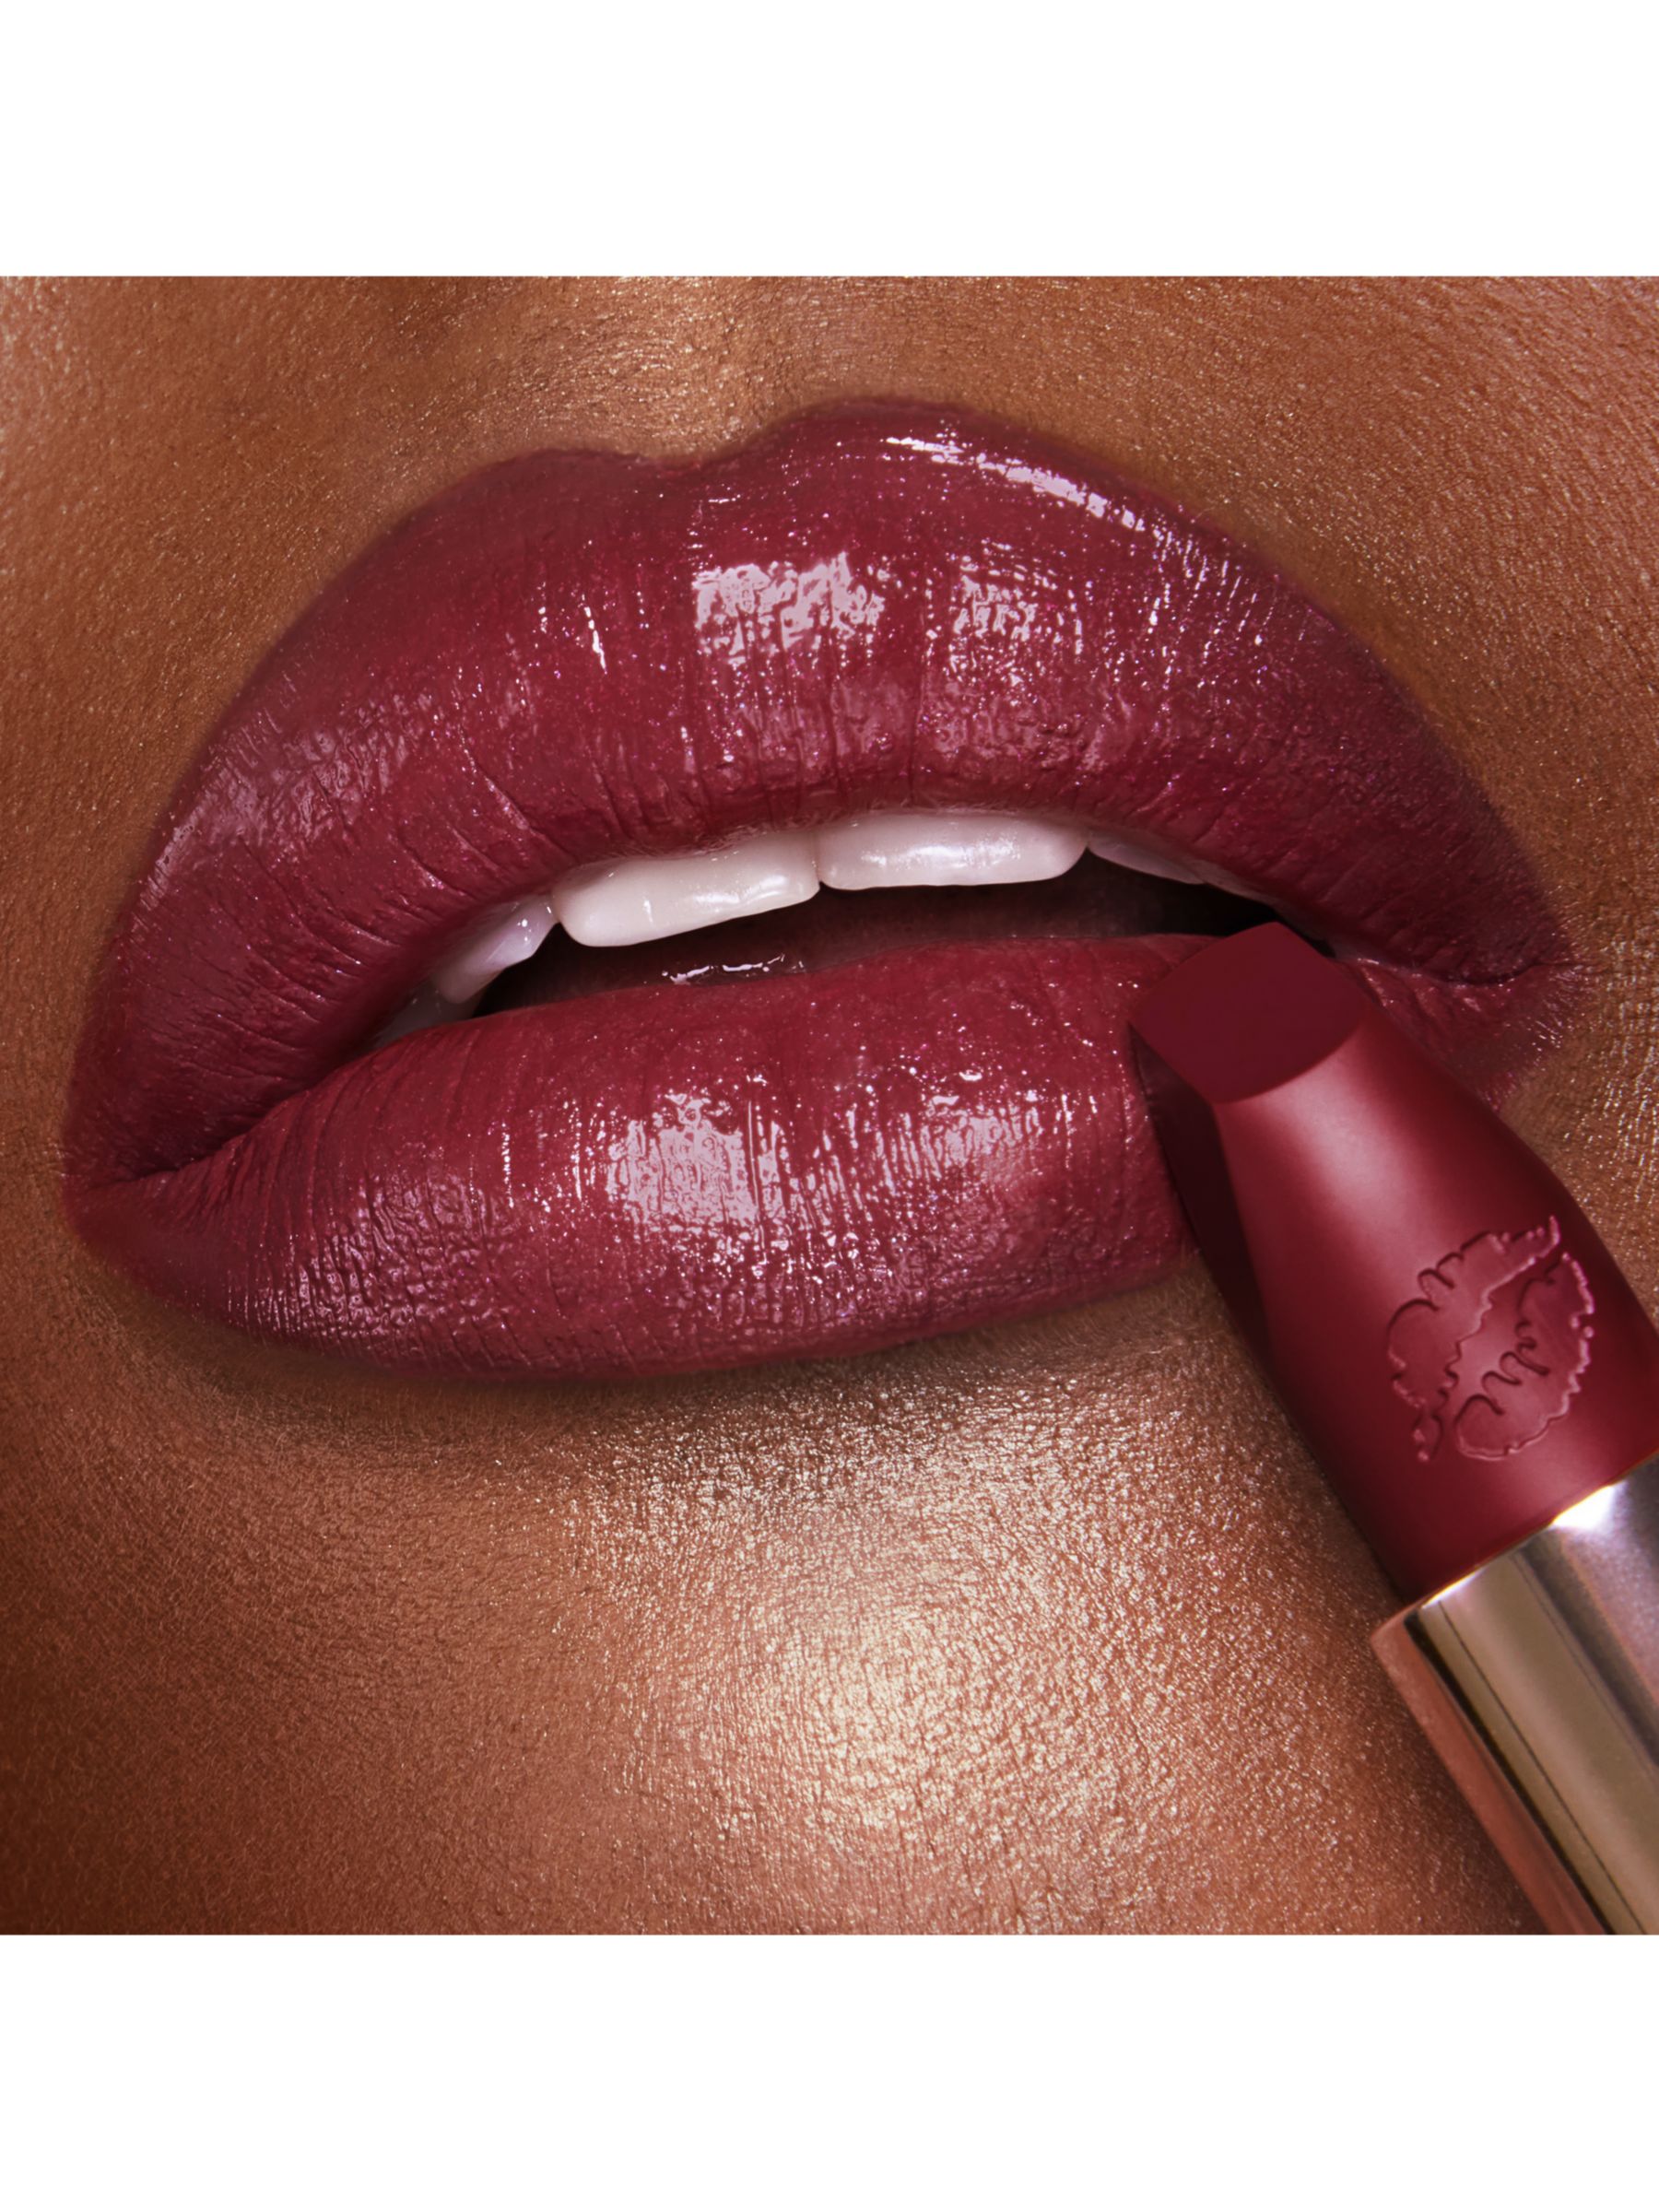 Charlotte Tilbury Limited Edition Rock Lips Lipstick, Ready For Lust 6